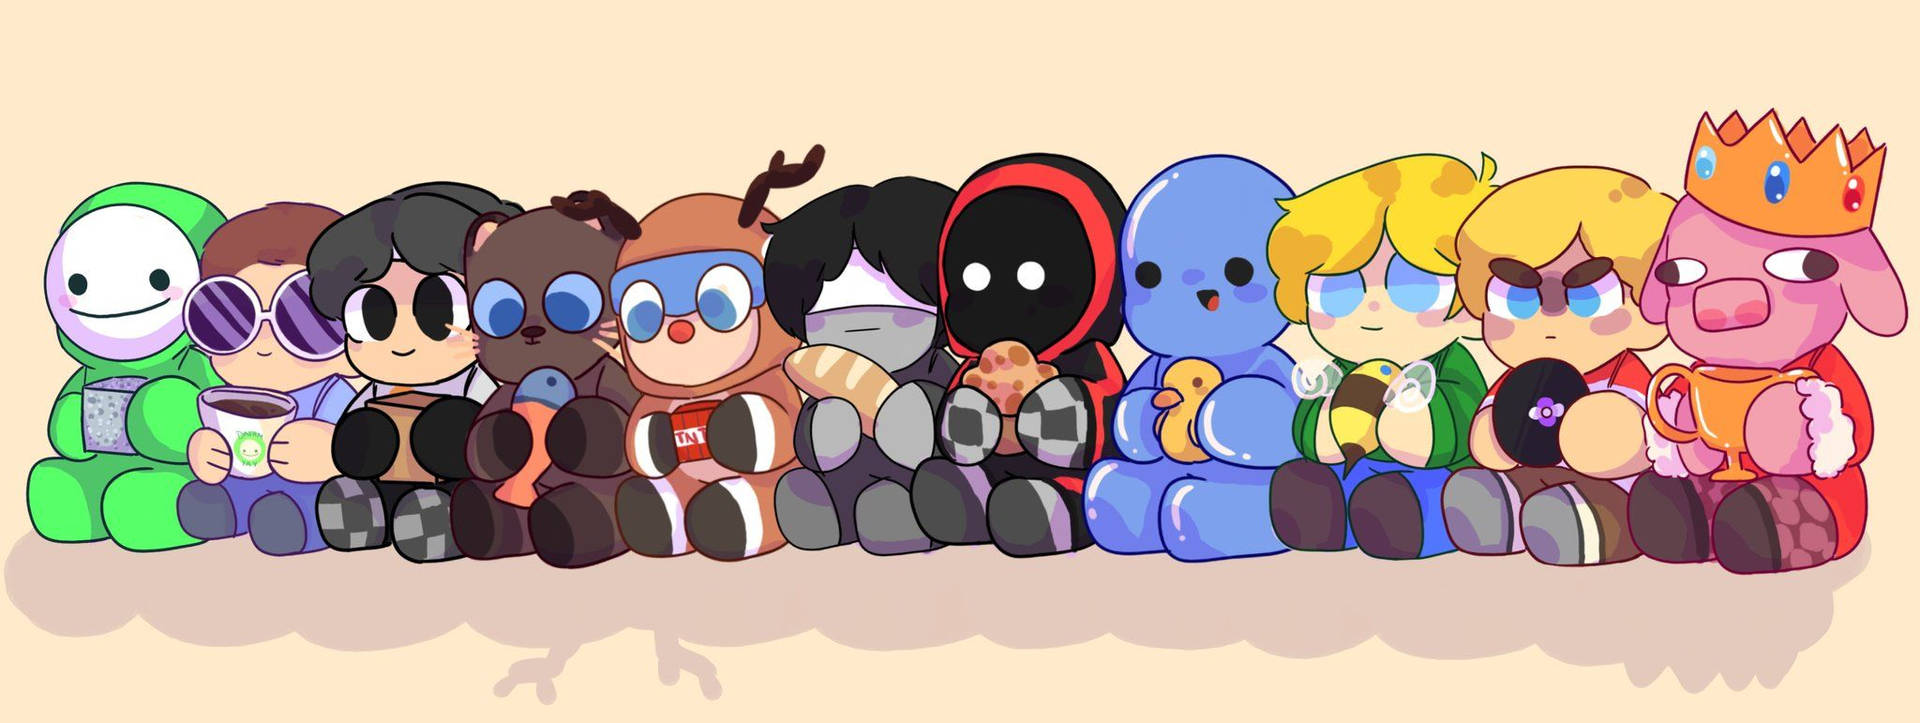 Adorable Mcyt Sitting Characters Background